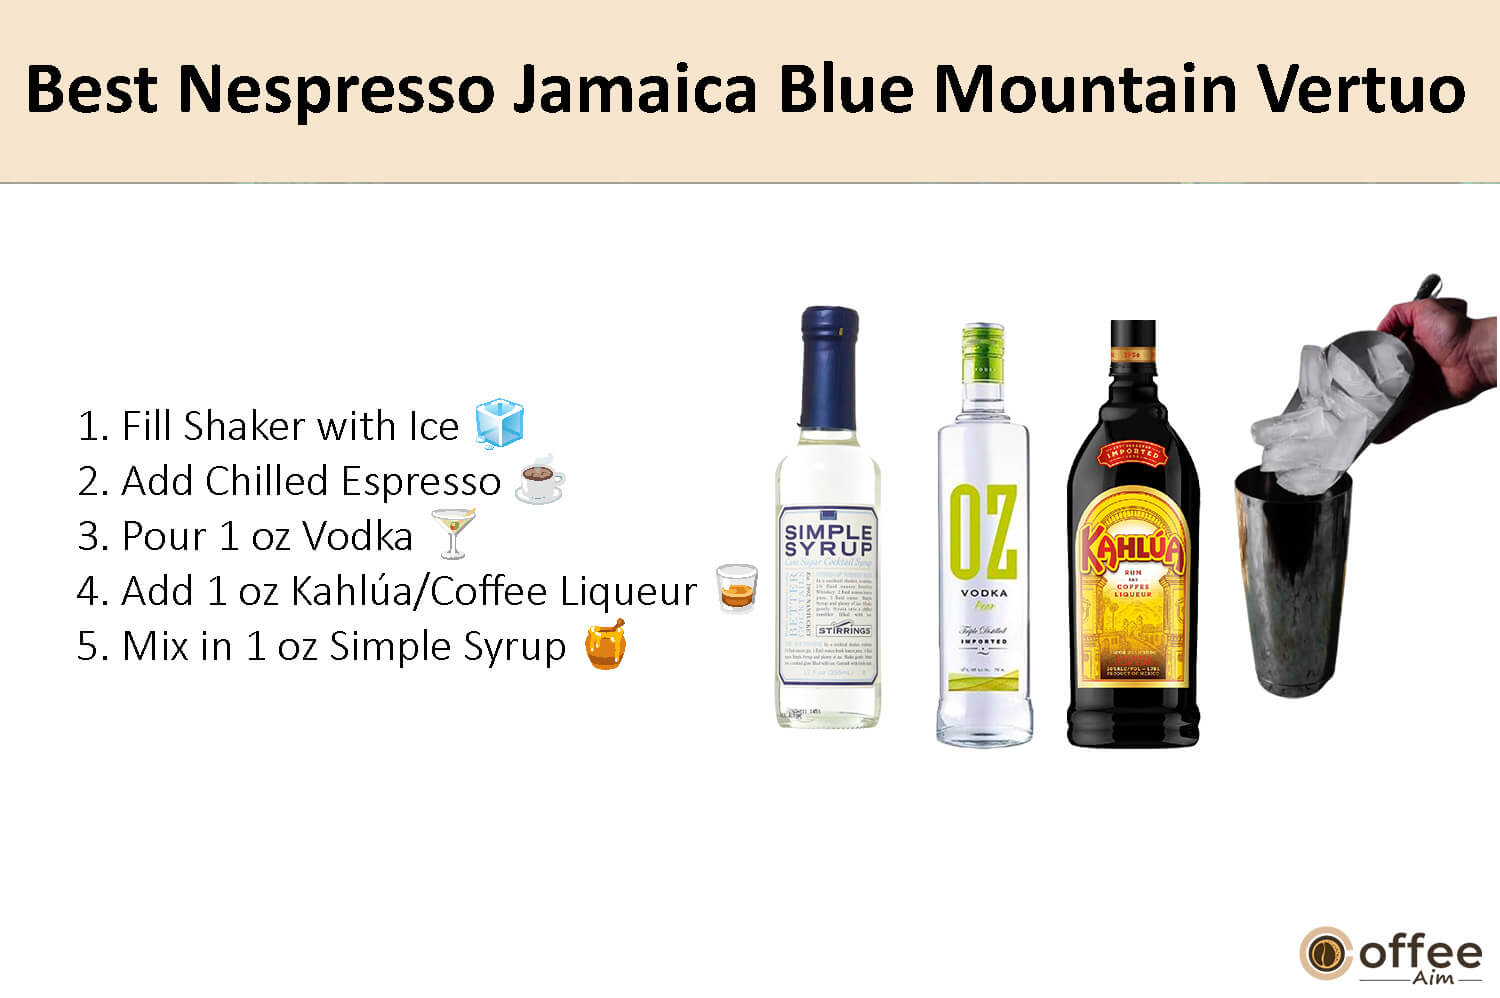 In this image, I elucidate the preparation instructions for crafting the finest Nespresso Jamaica Blue Mountain Vertuo coffee pod.